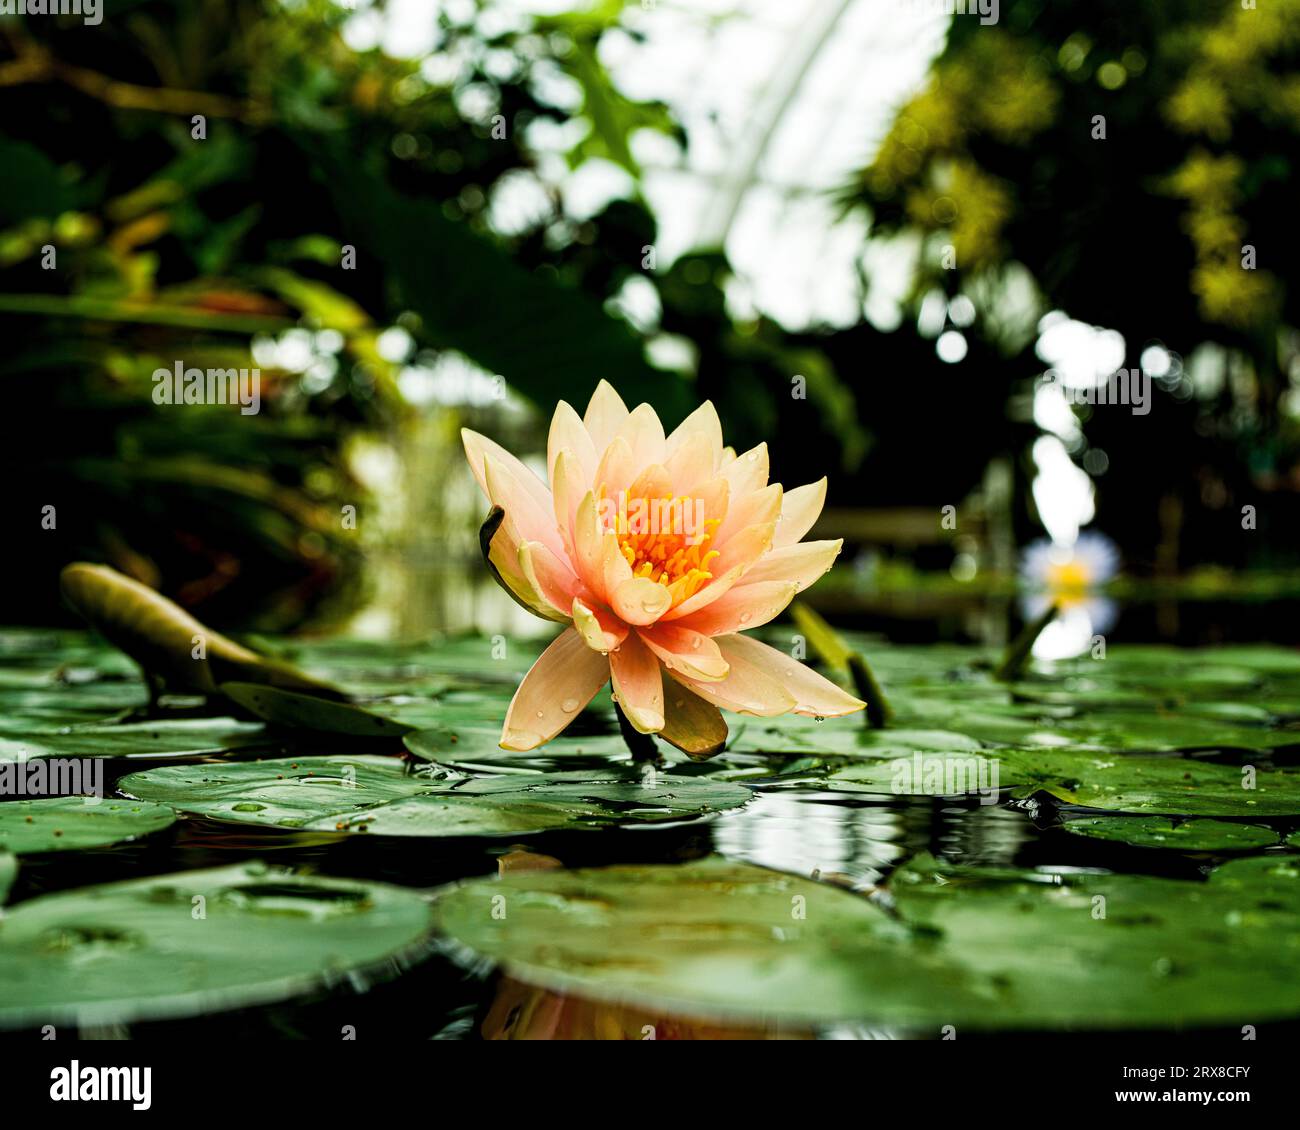 Amazon Water Lily at the Conservatory of Flower San Francisco Stock Photo